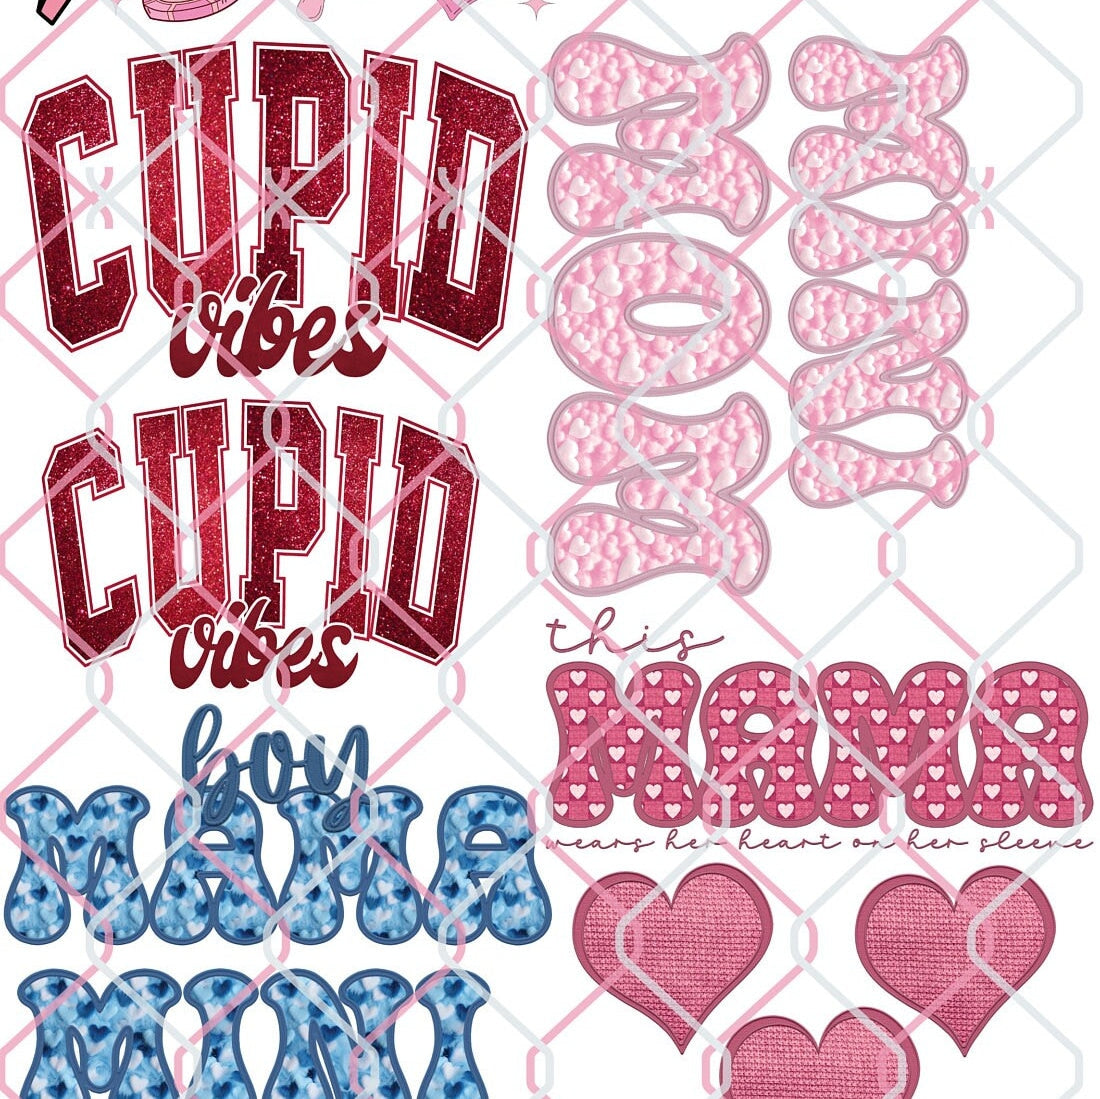 Mama & Mini Valentine Theme Pre-Made Gang Hot Peel Custom Full Color Ready For Press DTF Print Transfer, Direct To Film 22x60